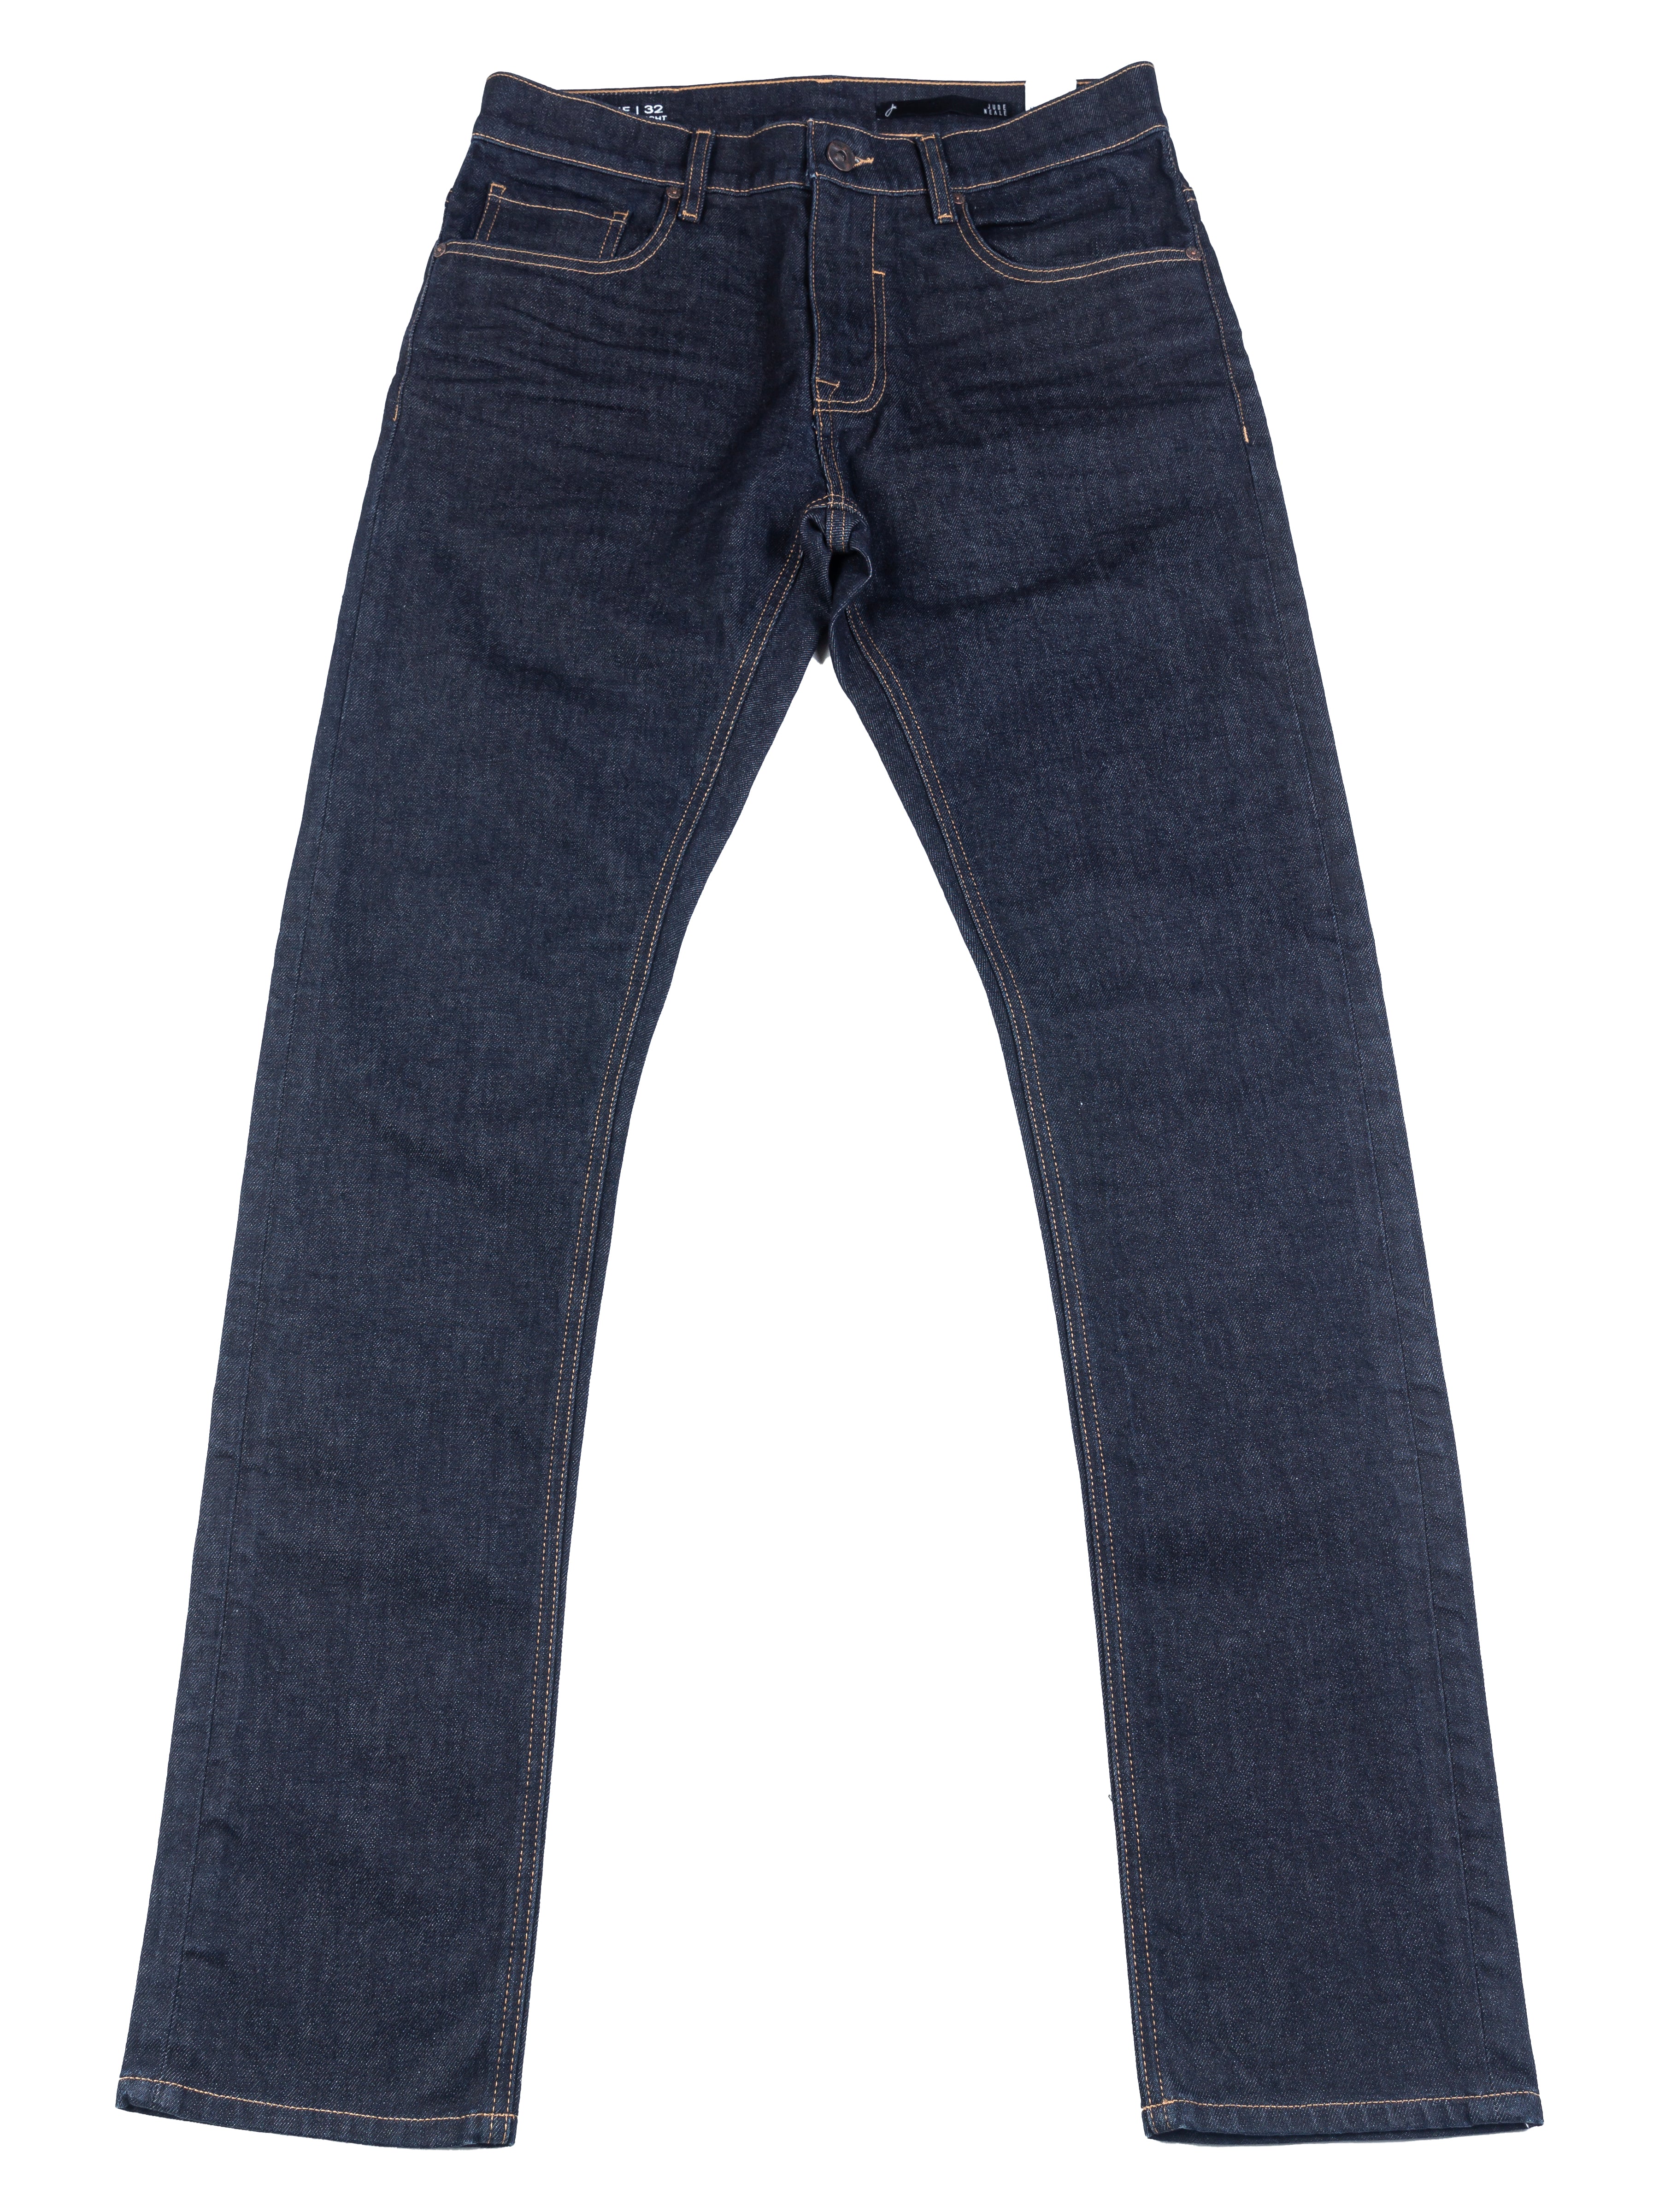 Axe Raw Slim Straight fit